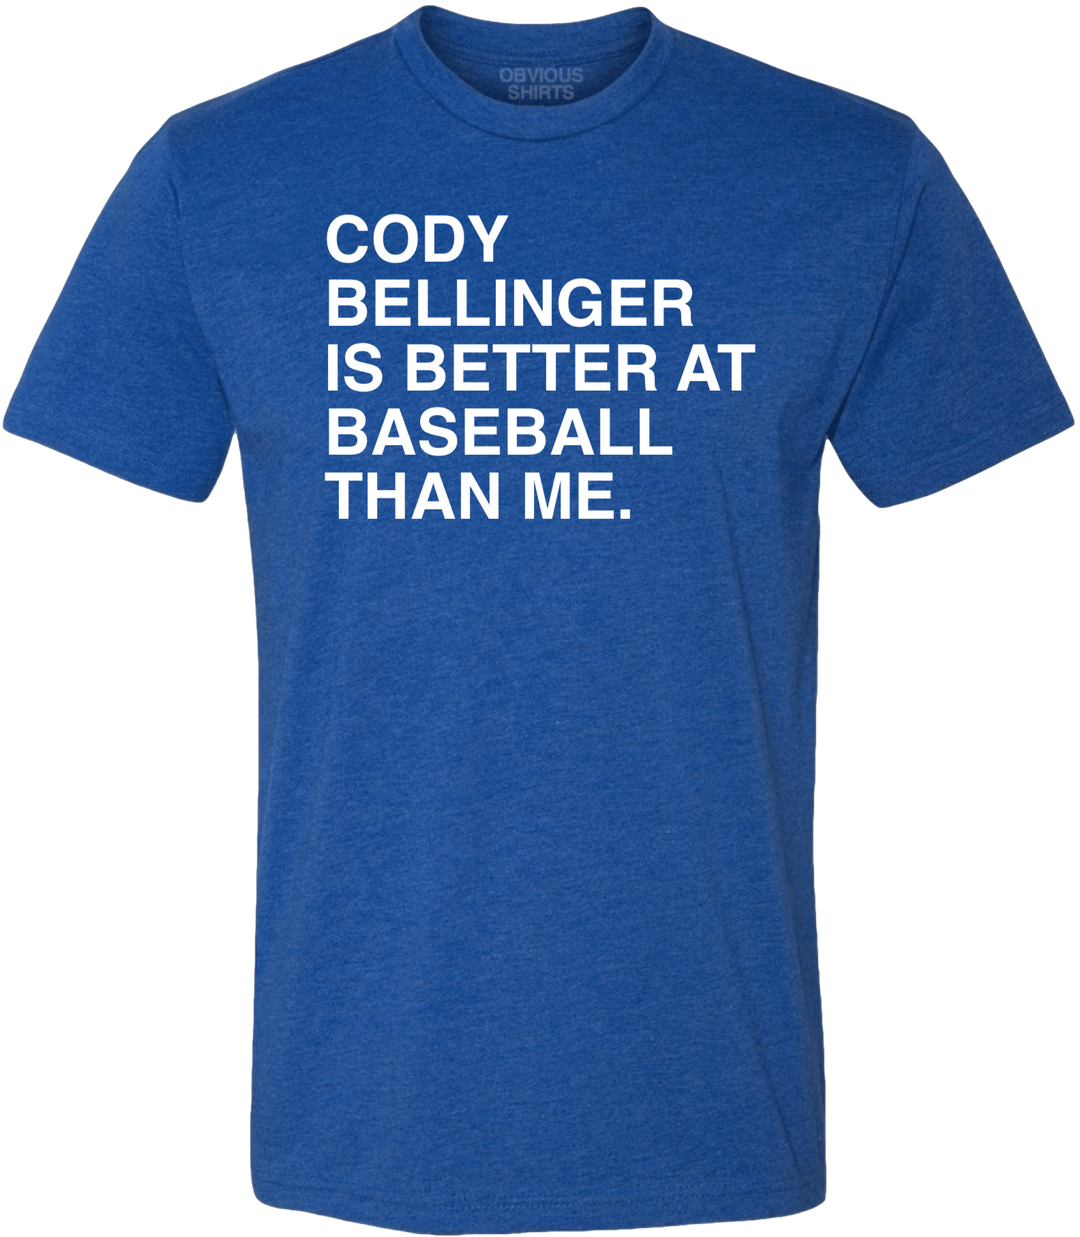 CODY BELLINGER IS BETTER AT BASEBALL THAN ME. - OBVIOUS SHIRTS